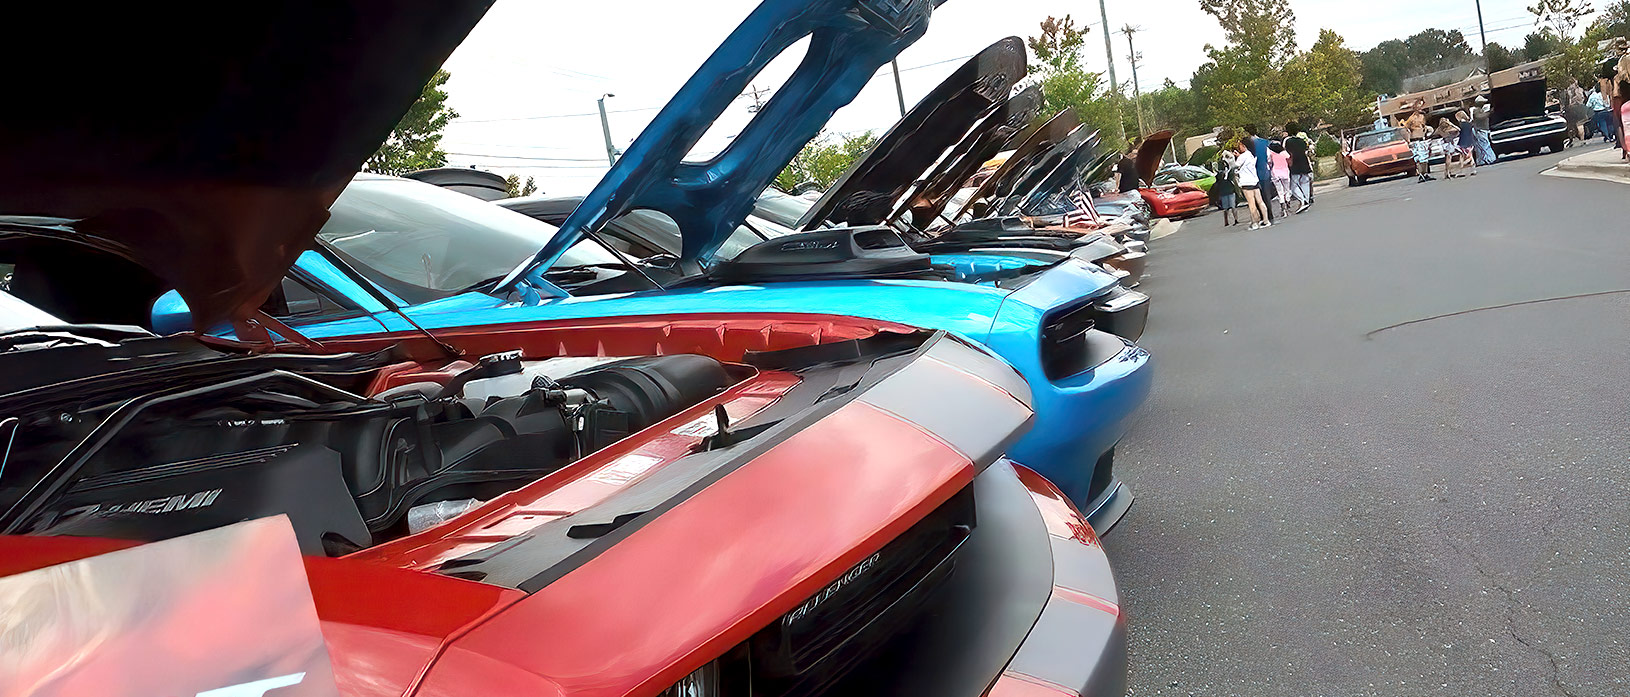 Row of Dodge Challengers at a car show